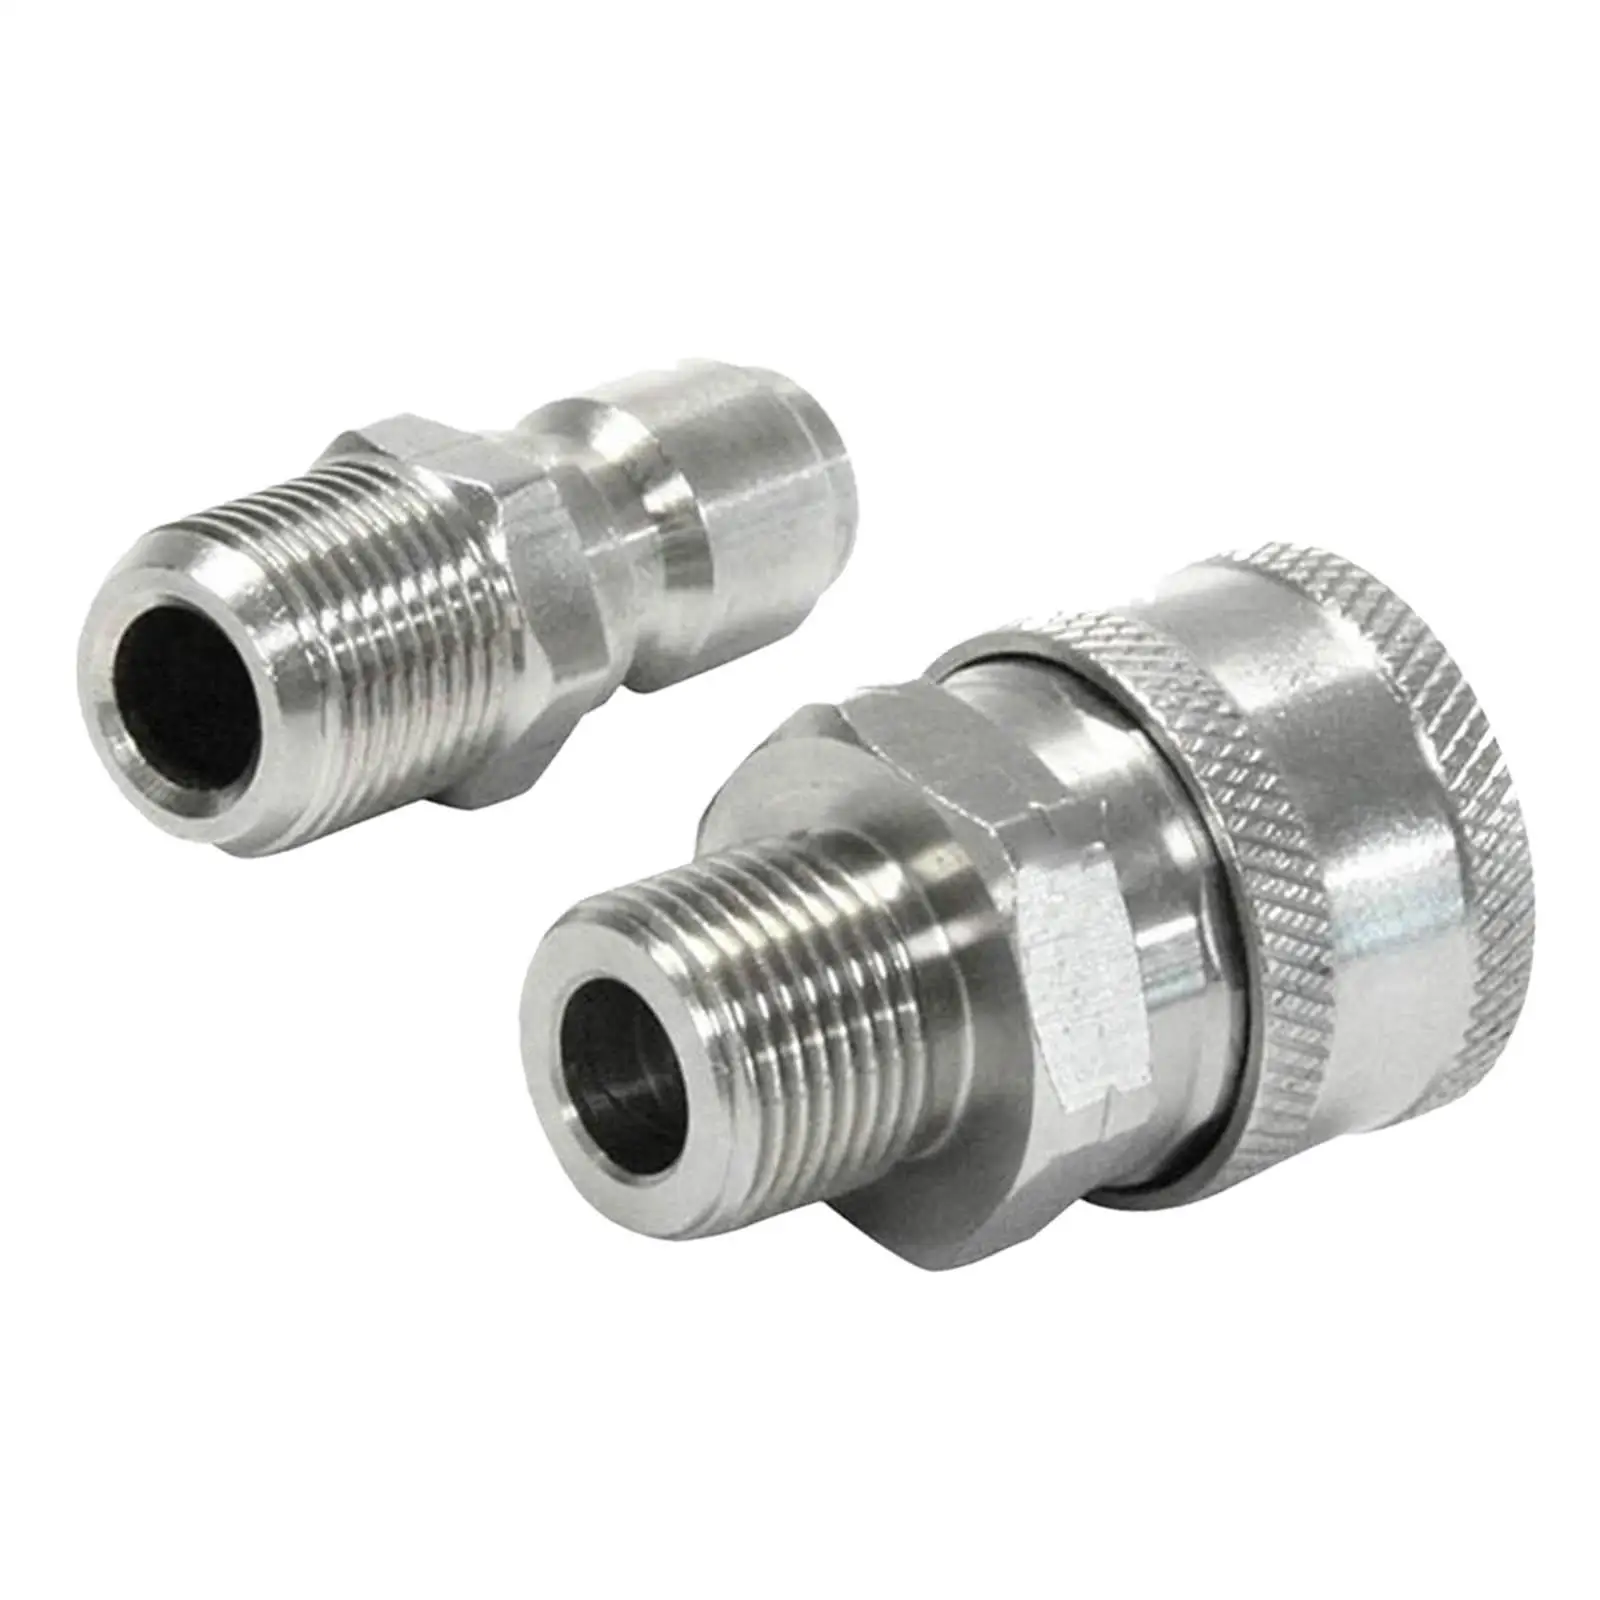 2 Pieces Pressure Washer Adapter Set 3/8 inch Water Pump Telescopic Rod Male Female Hose Not Easy to Leak Surface Cleaner